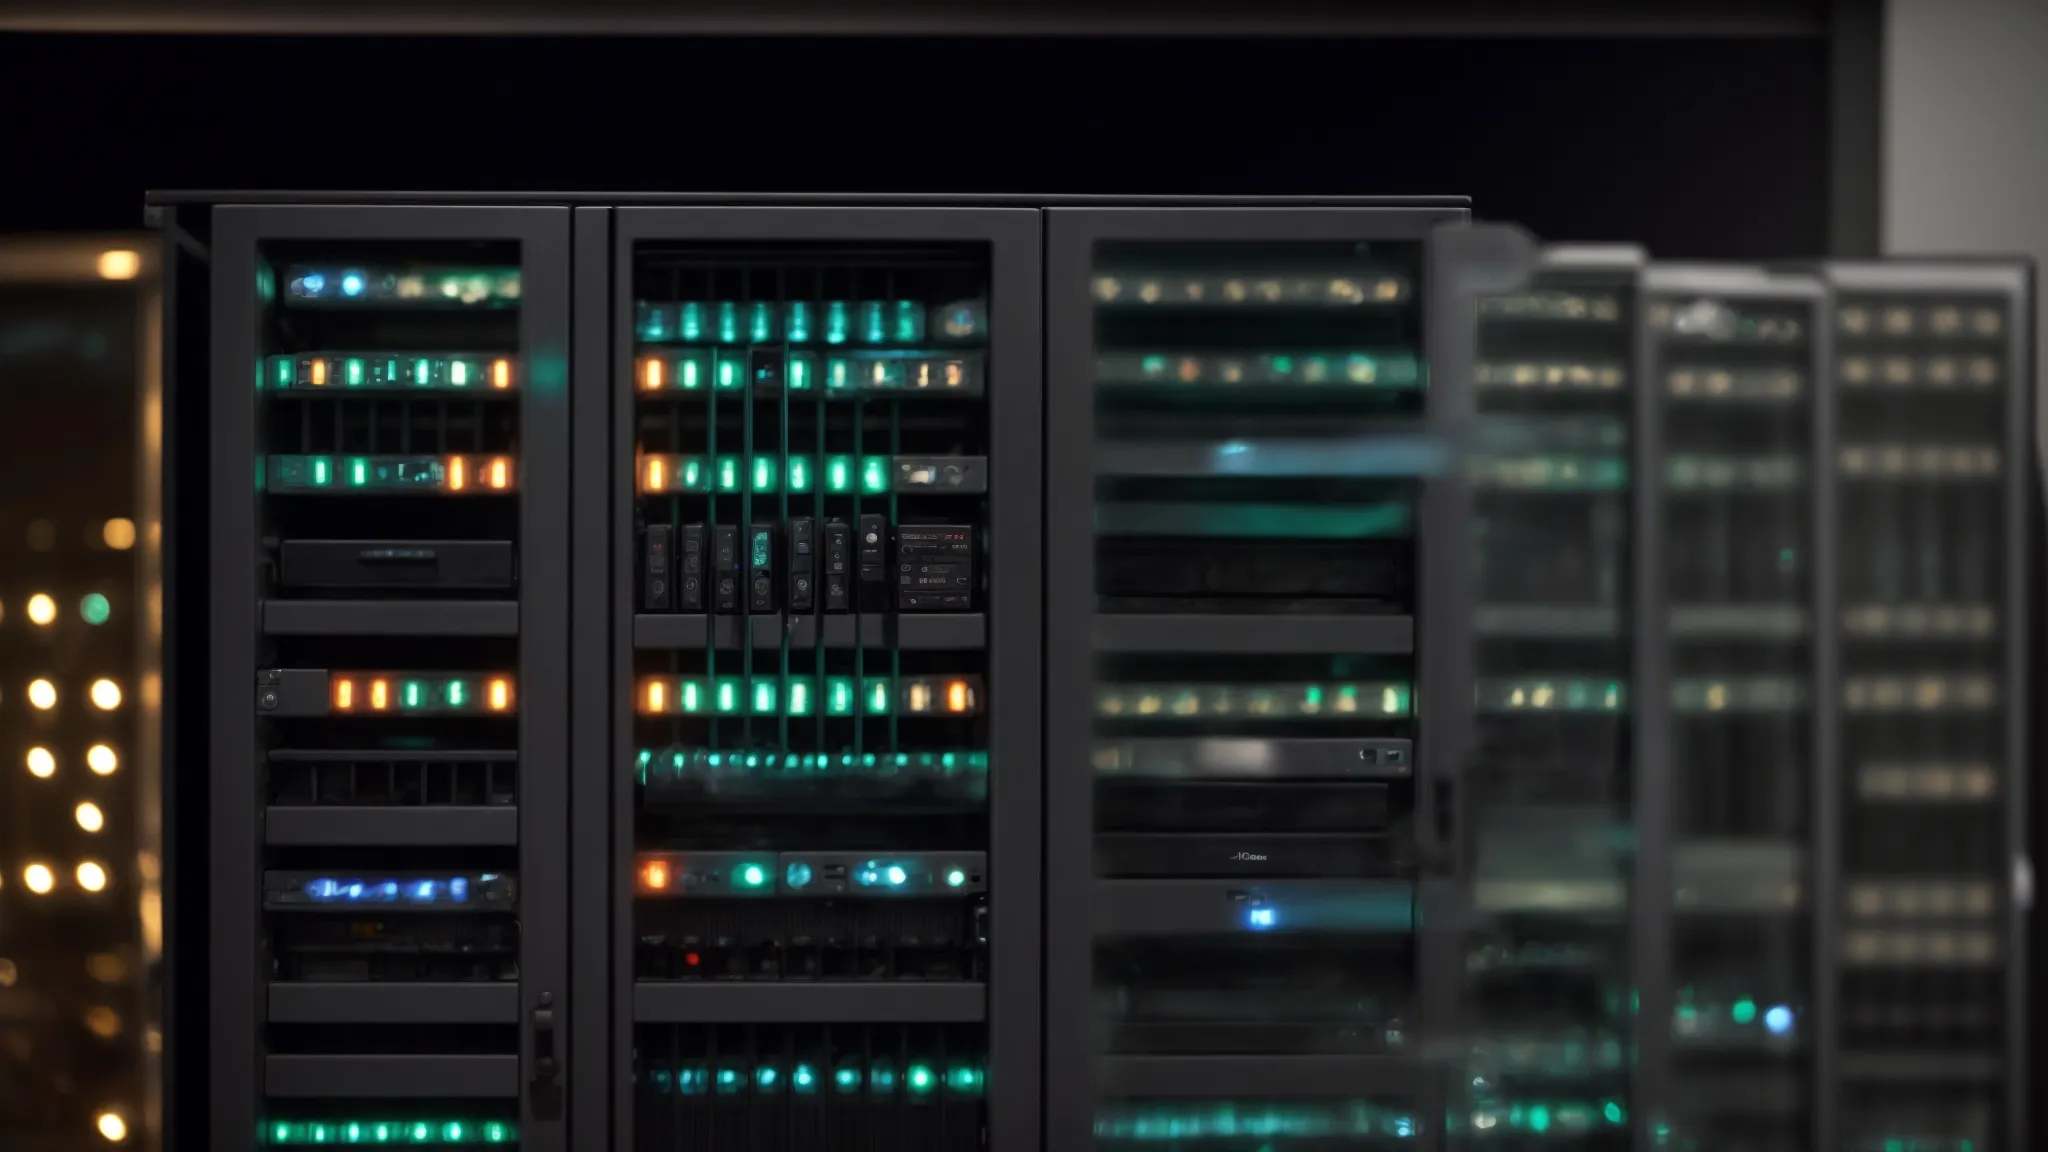 a server rack with blinking lights indicating active data processing.